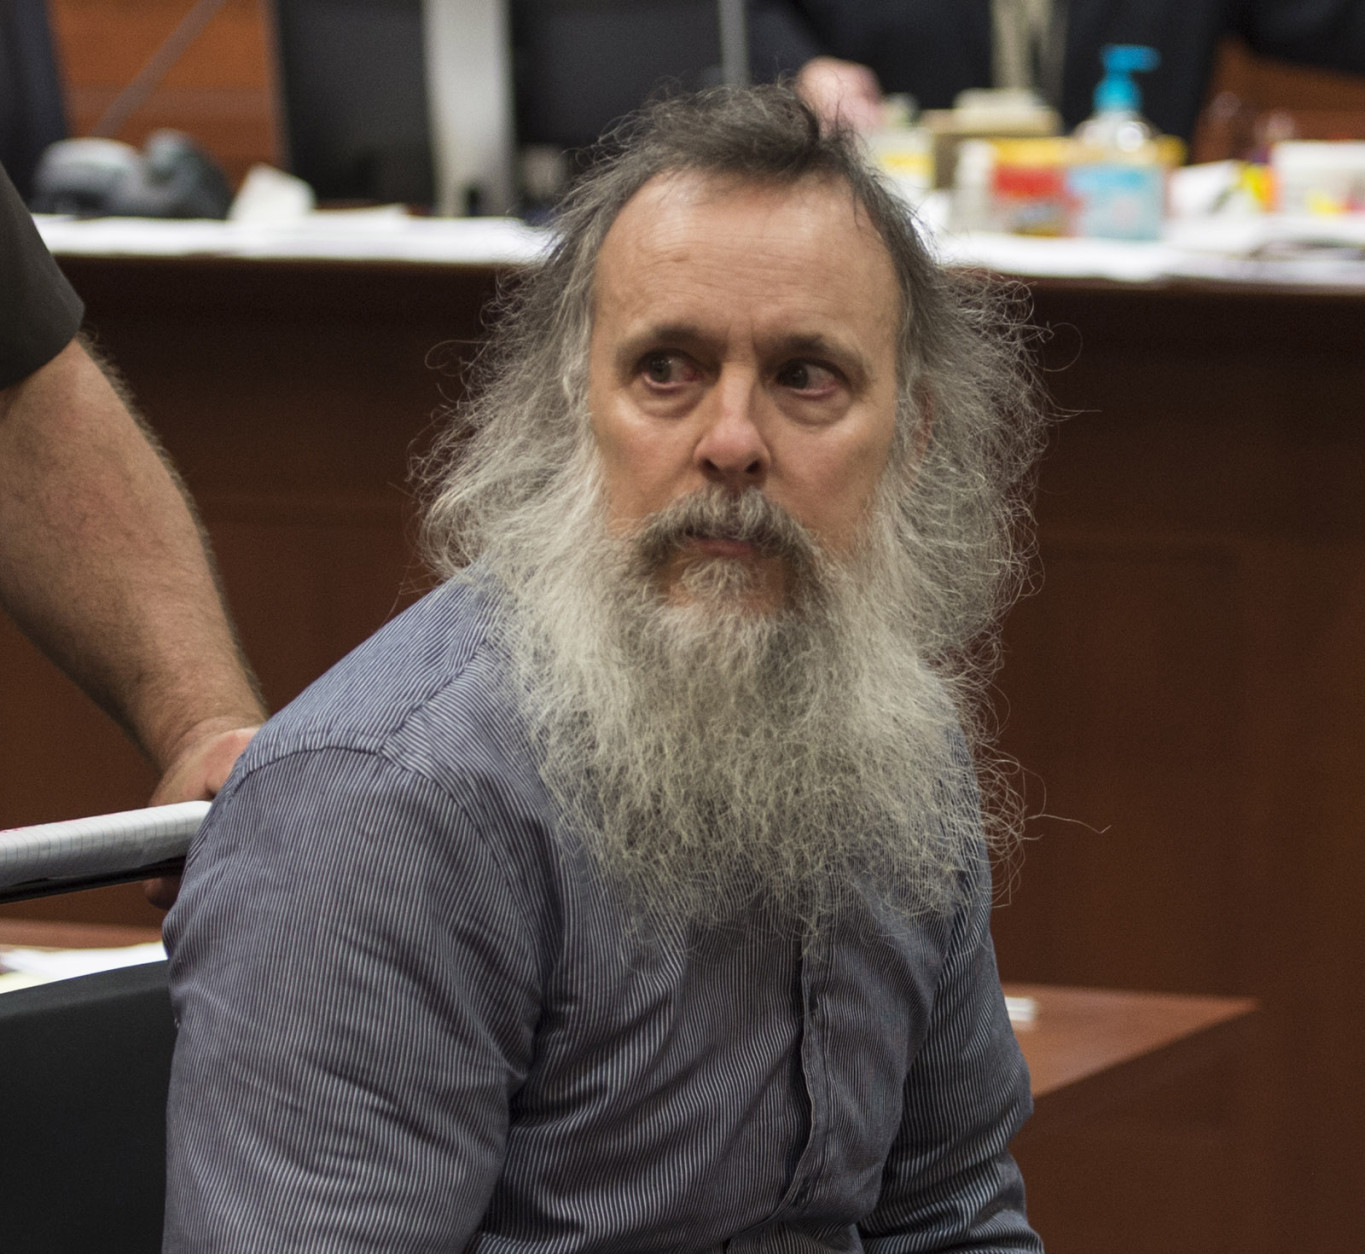 Charles Severance is escorted out of the courtroom during a short recess in his murder trial at the Fairfax County Circuit Court in Fairfax, Virginia, on Wednesday, October 28, 2015. (Photo by Nikki Kahn/The Washington Post)